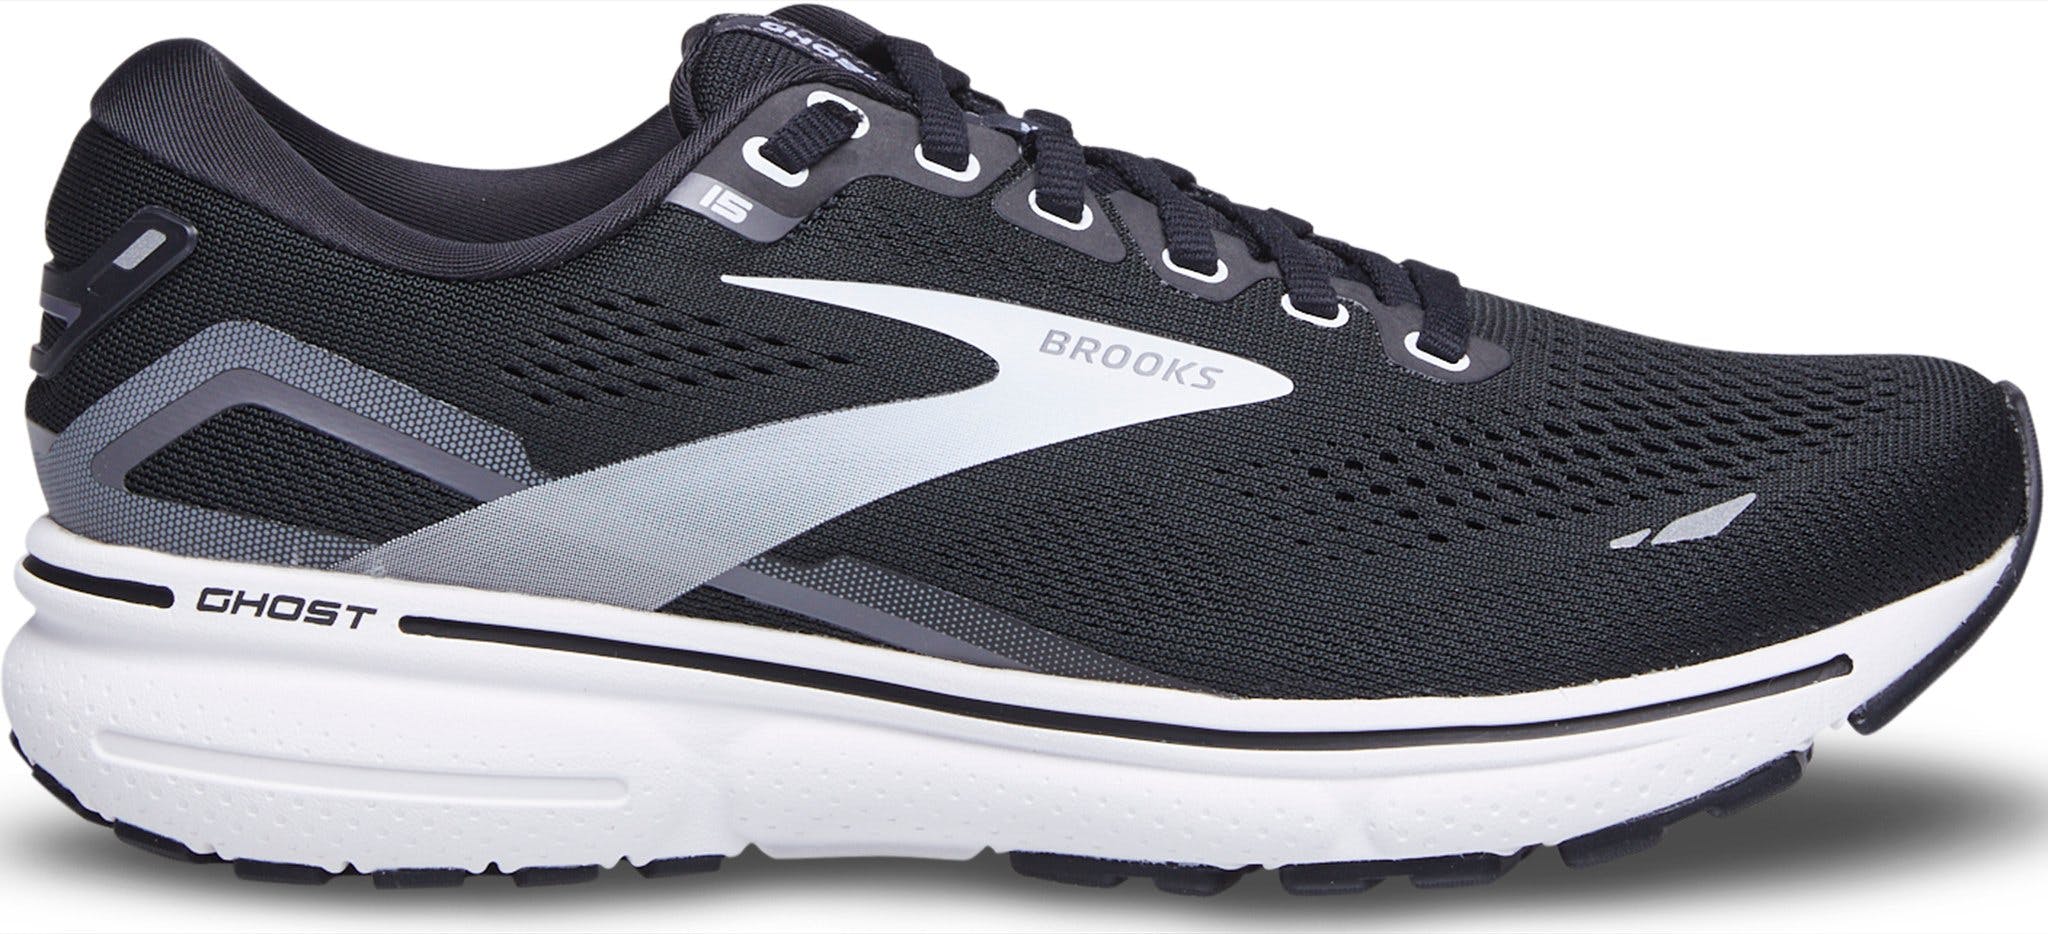 Product image for Ghost 15 Road Running Shoes - Men's